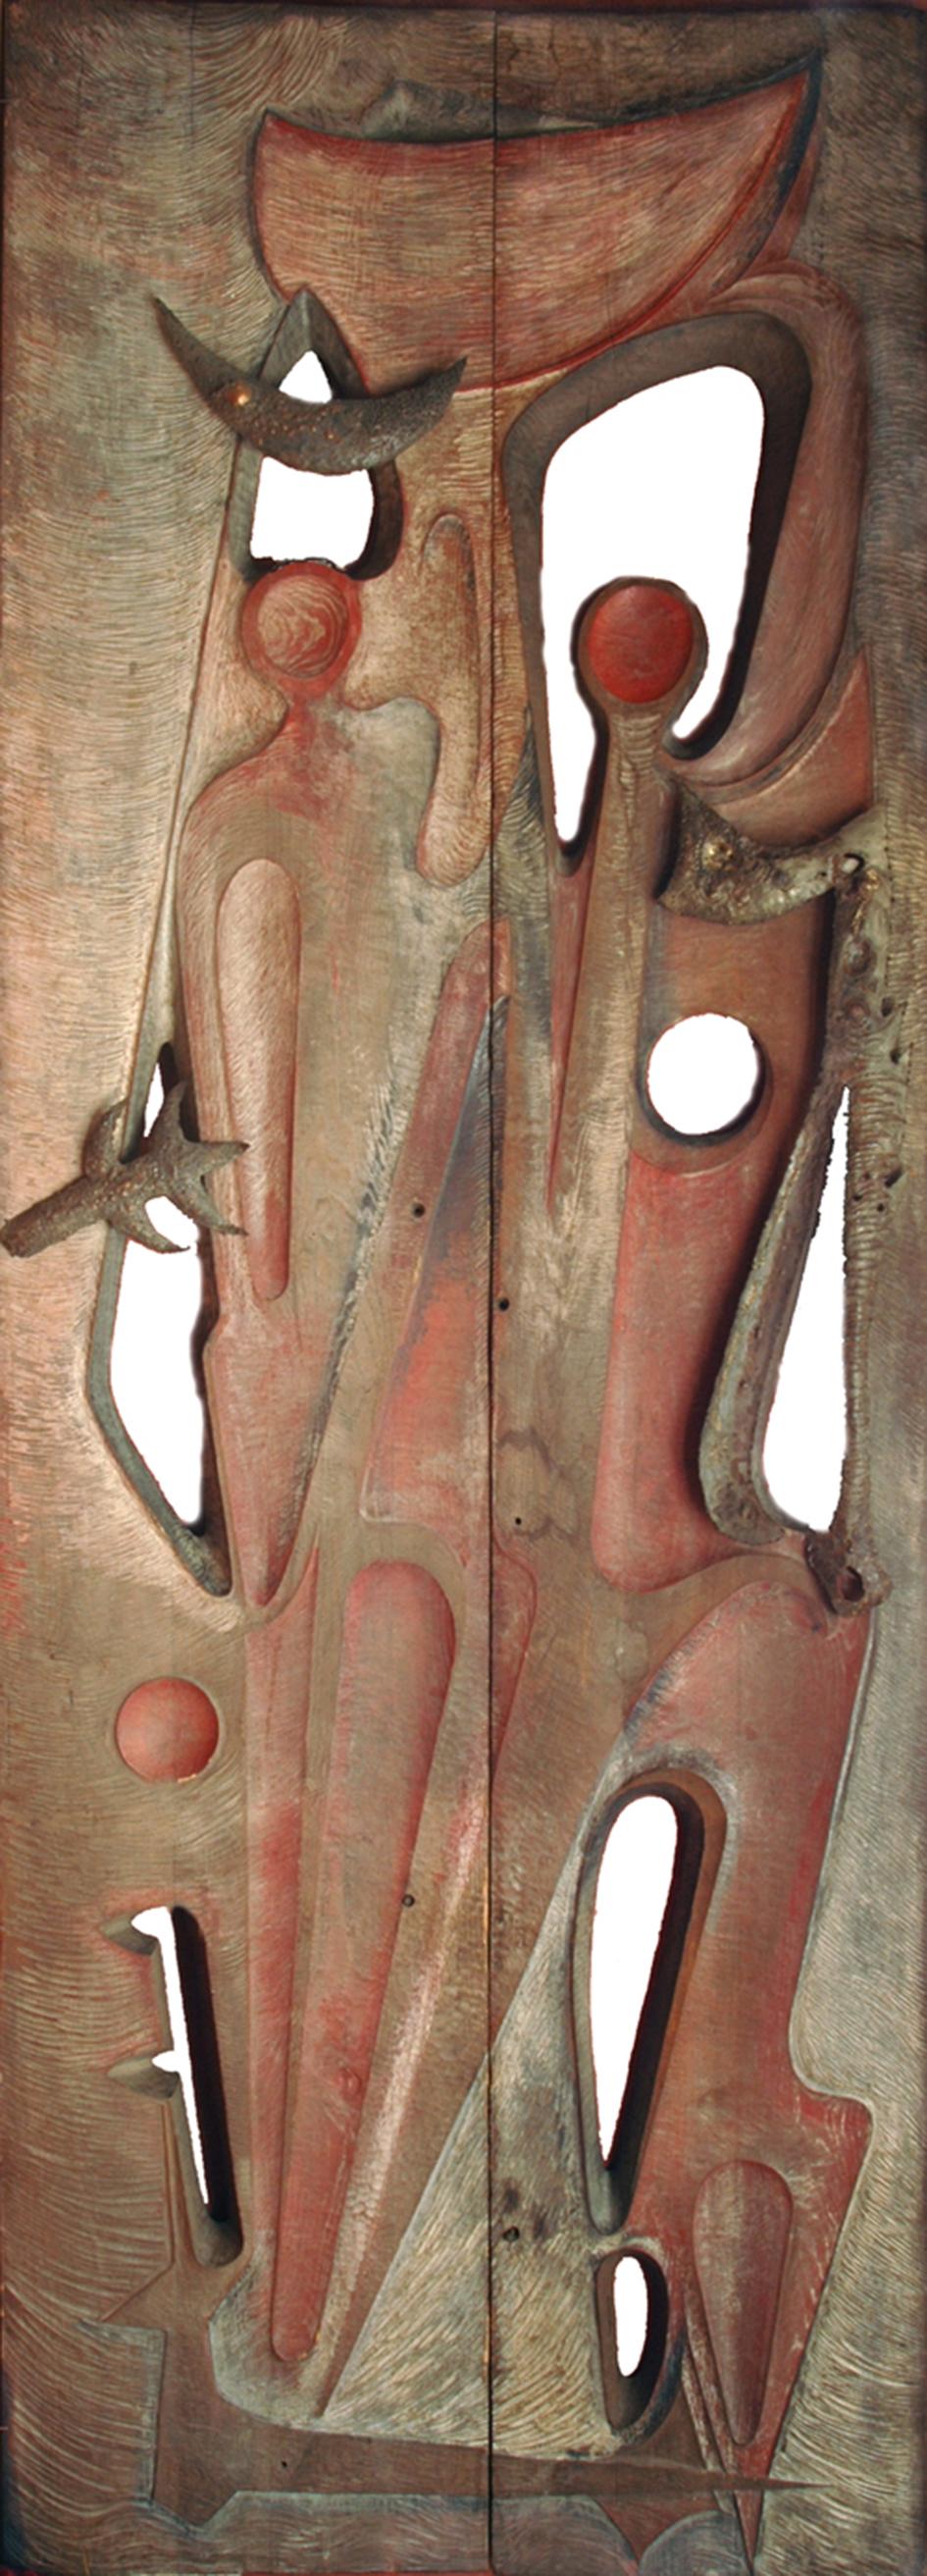 These doors were exhibited in 1969 (13 july to 31 august) at the Blanckenberge Casino, with fifteen other sculptures and forty drawings. His works show his inner strength and show great spontaneity in execution.

Gilbert De Smet
Born in 1932 to